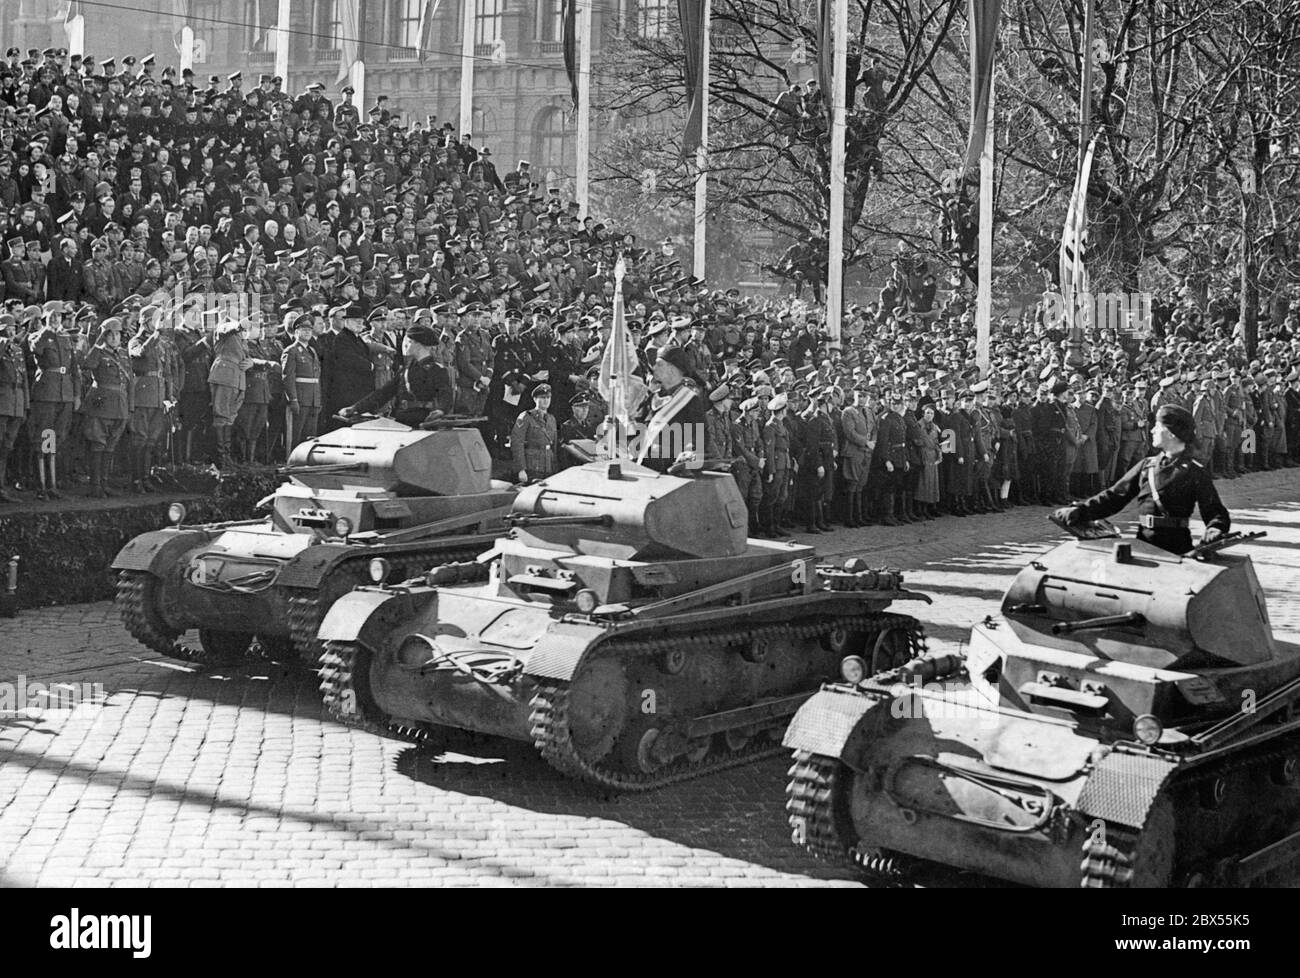 German Panzer II tanks drive past the German dictator Adolf Hitler with a military parade. The parade takes place in the course of Austria's annexation to the German Reich. To the right of Adolf Hitler are the generals Fedor von Bock and Alfred Krauss (in civilian clothes). Stock Photo